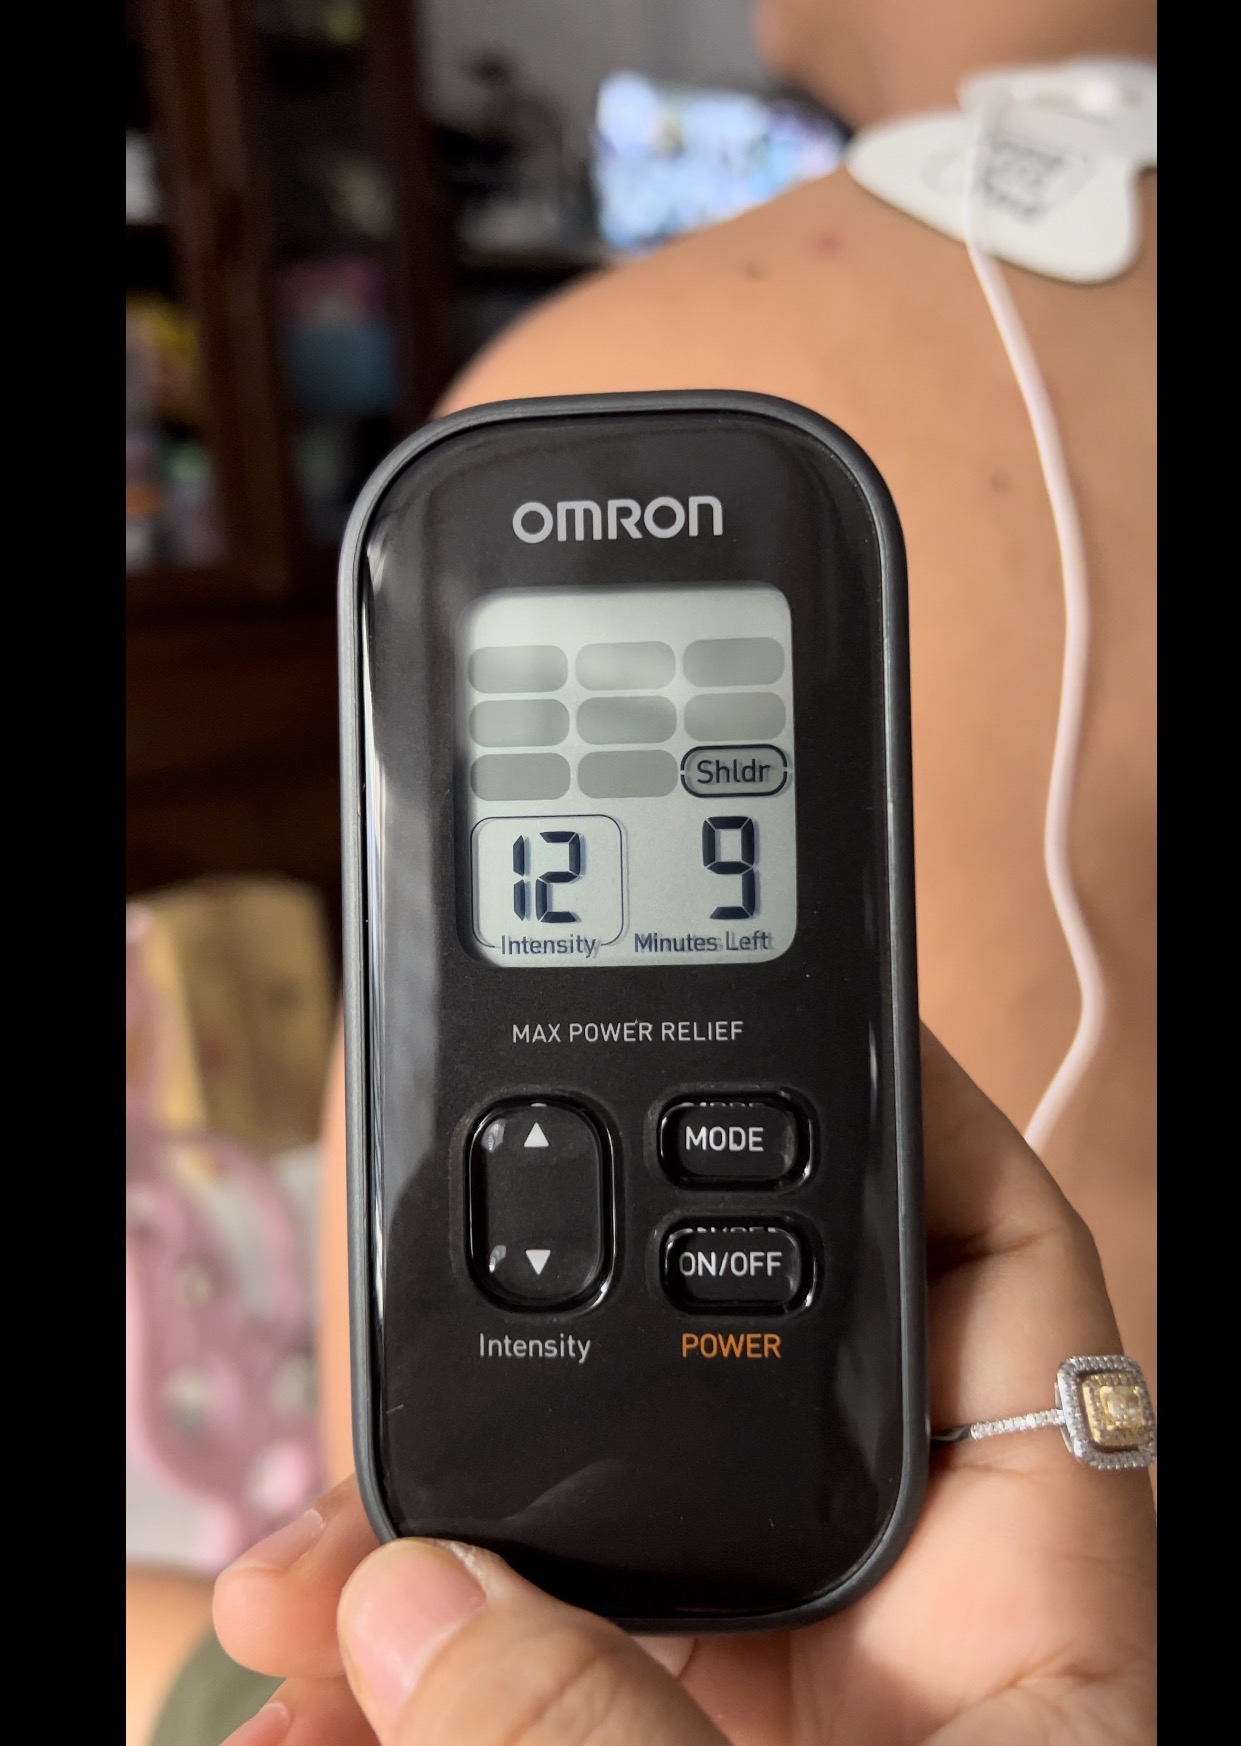 Omron PM500 Max Power Relief TENS Device & PMLLPAD-L